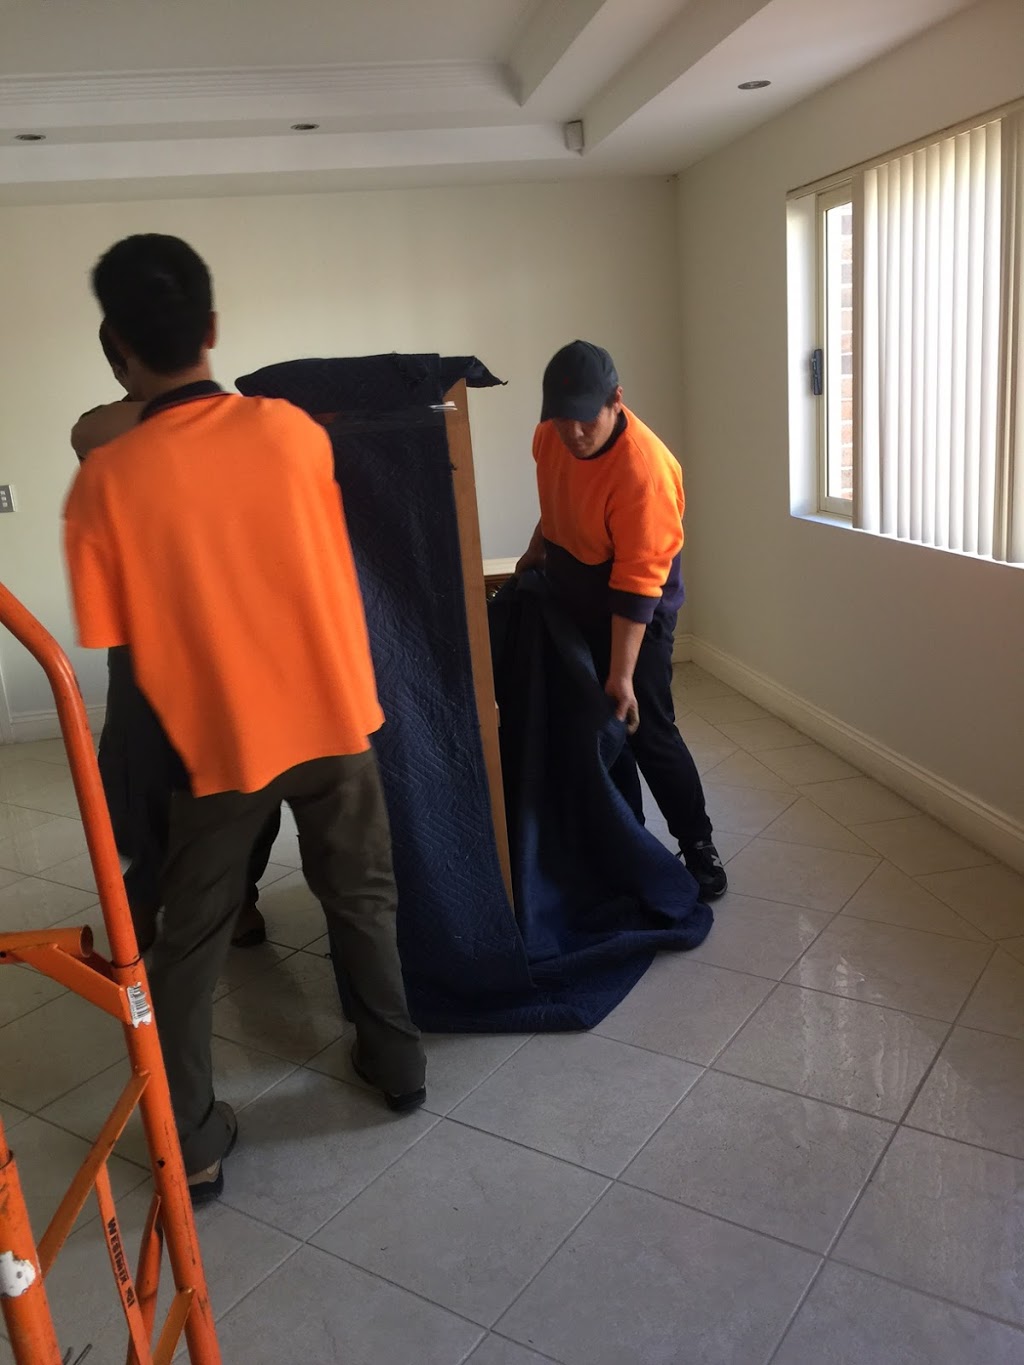 AAA Holden Removals Removalists - Moving House & Moving Home Pro | moving company | 35 Vore Street, Silverwater, Sydney NSW 2128, Australia | 0404606555 OR +61 404 606 555